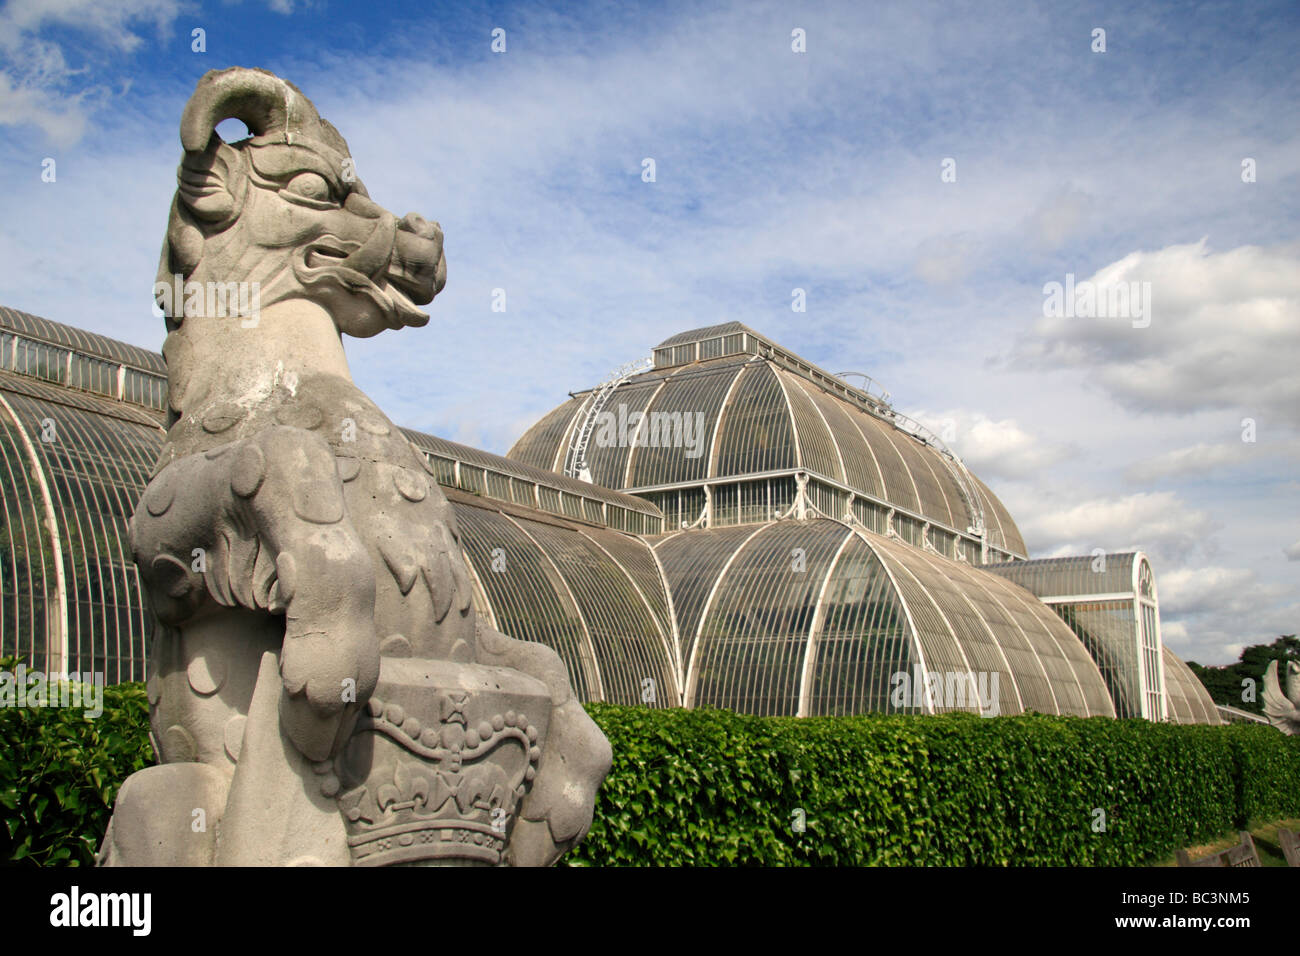 A 'Lion of England' statue in front of the Palm House, The Royal Botanic Gardens, Kew, Surrey, England. Stock Photo